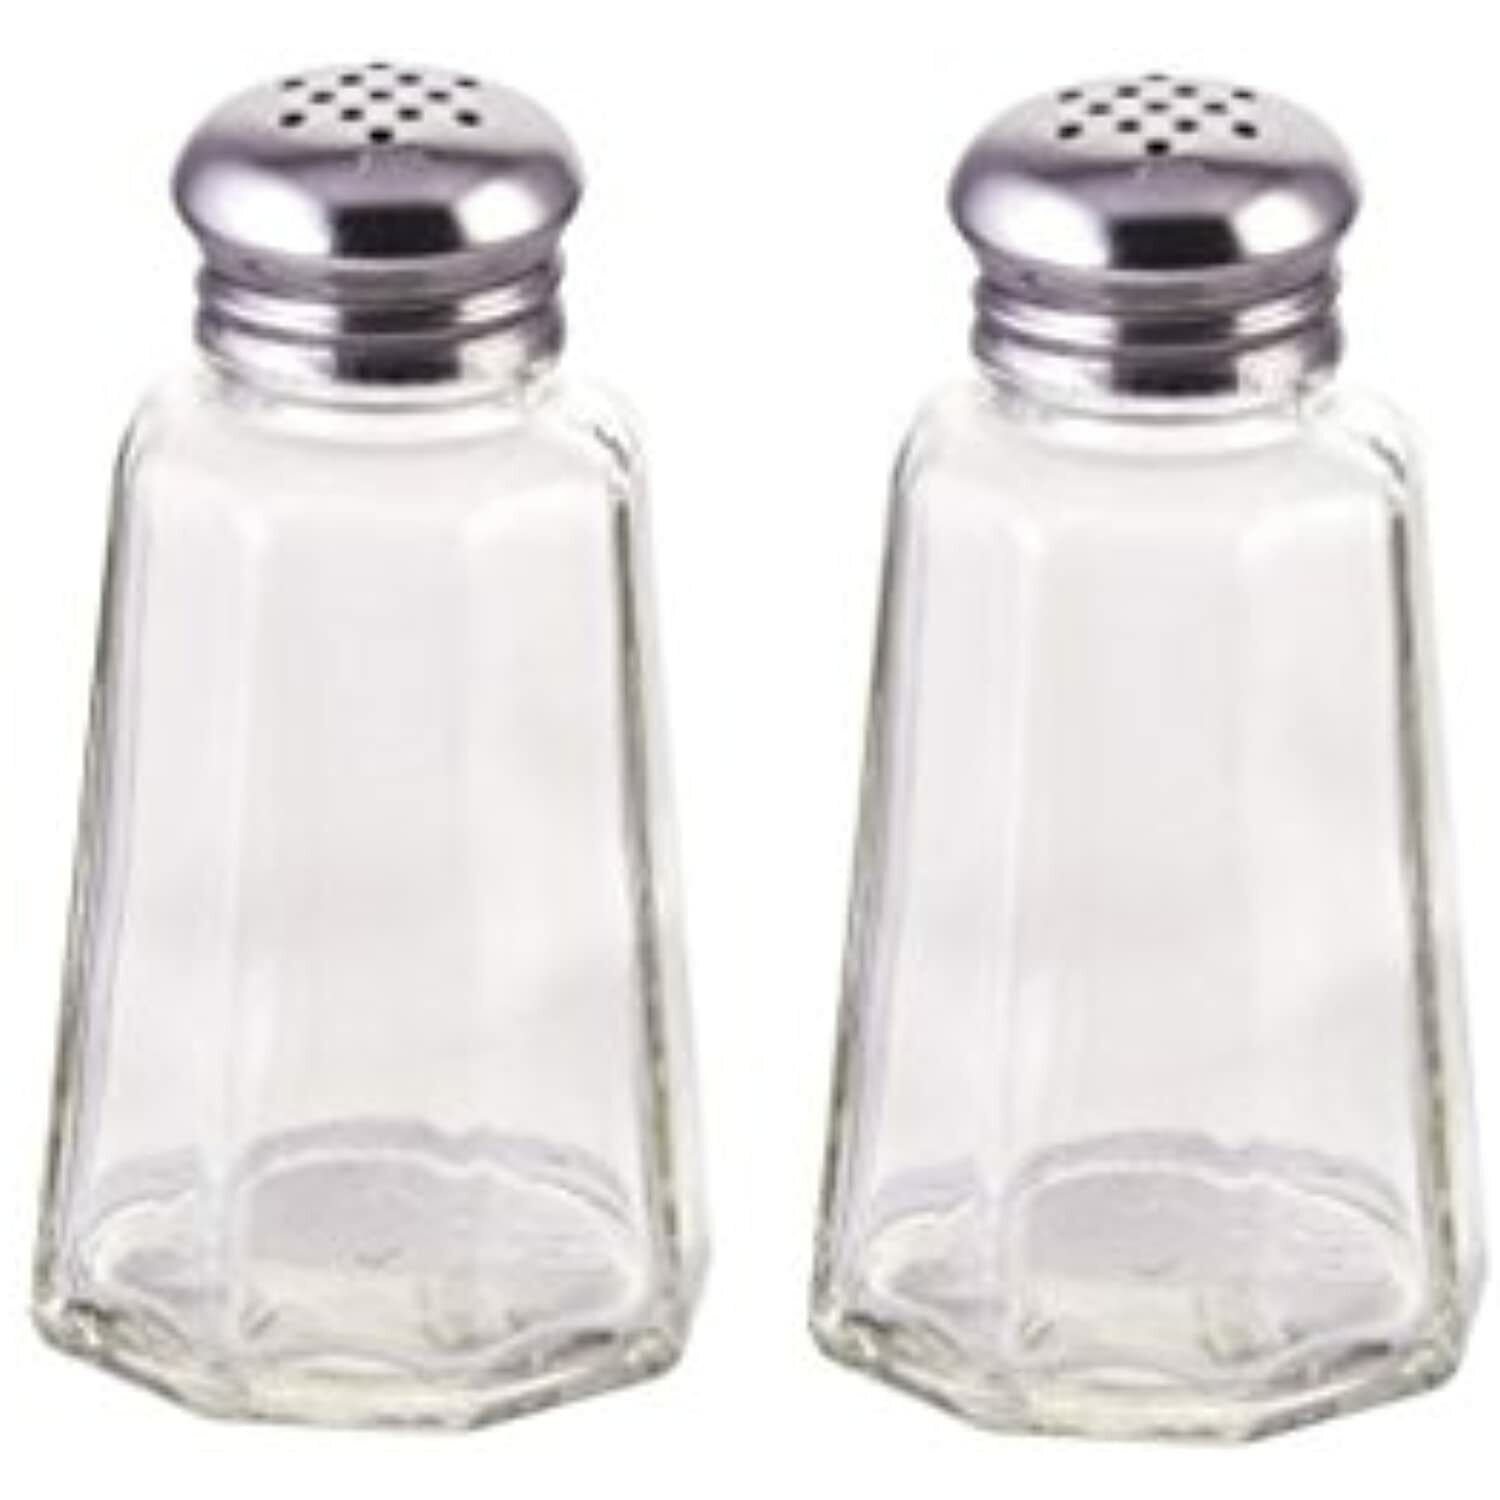 Salt and Pepper Shakers with Stainless Tops Set of 2 Paneled Shakers Glass